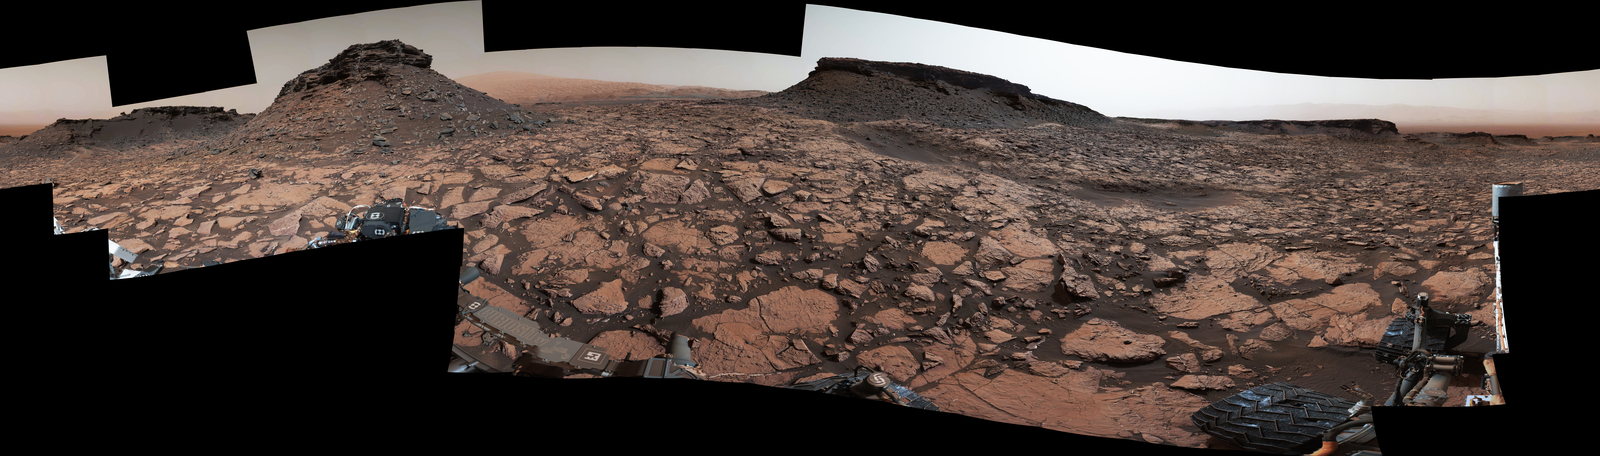 This 360-degree panorama was acquired on Sept. 4, 2016, by the Mast Camera on NASA's Curiosity Mars rover while the rover was in a scenic area called "Murray Buttes" on lower Mount Sharp. The flat-topped mesa near the center of the scene rises to about 39 feet above the surrounding plain.